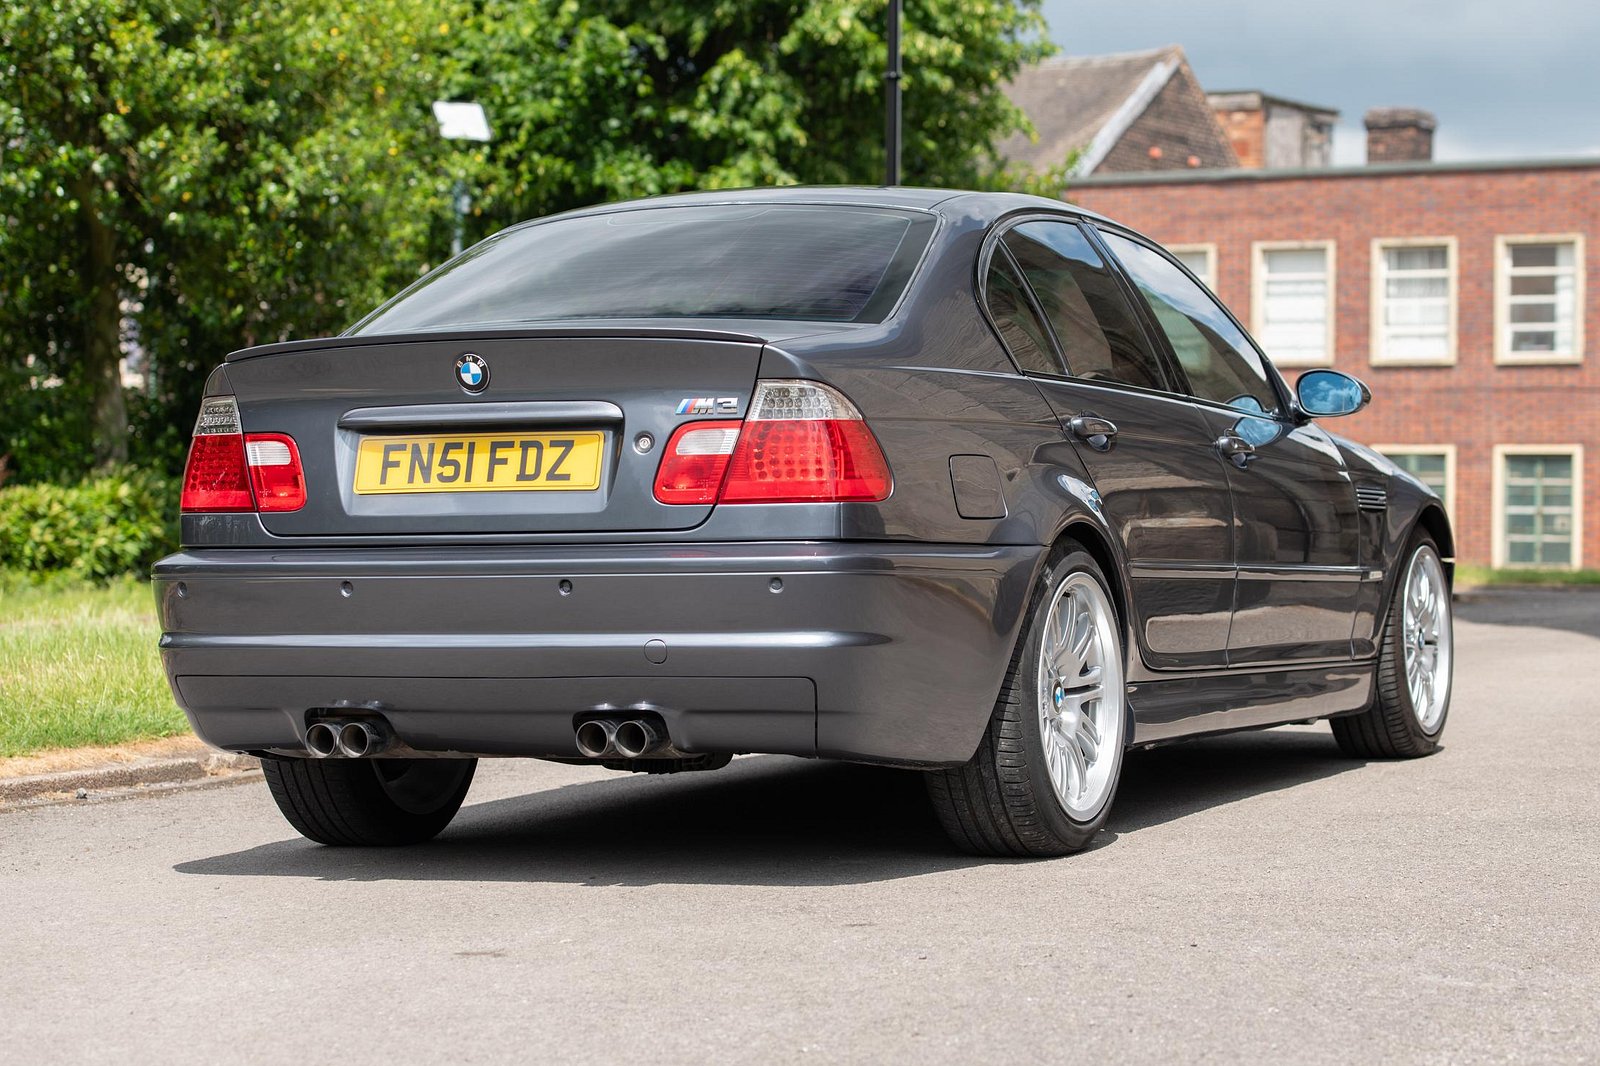 This E46 BMW M3 Four-Door Sedan Was Once A Humble 320i